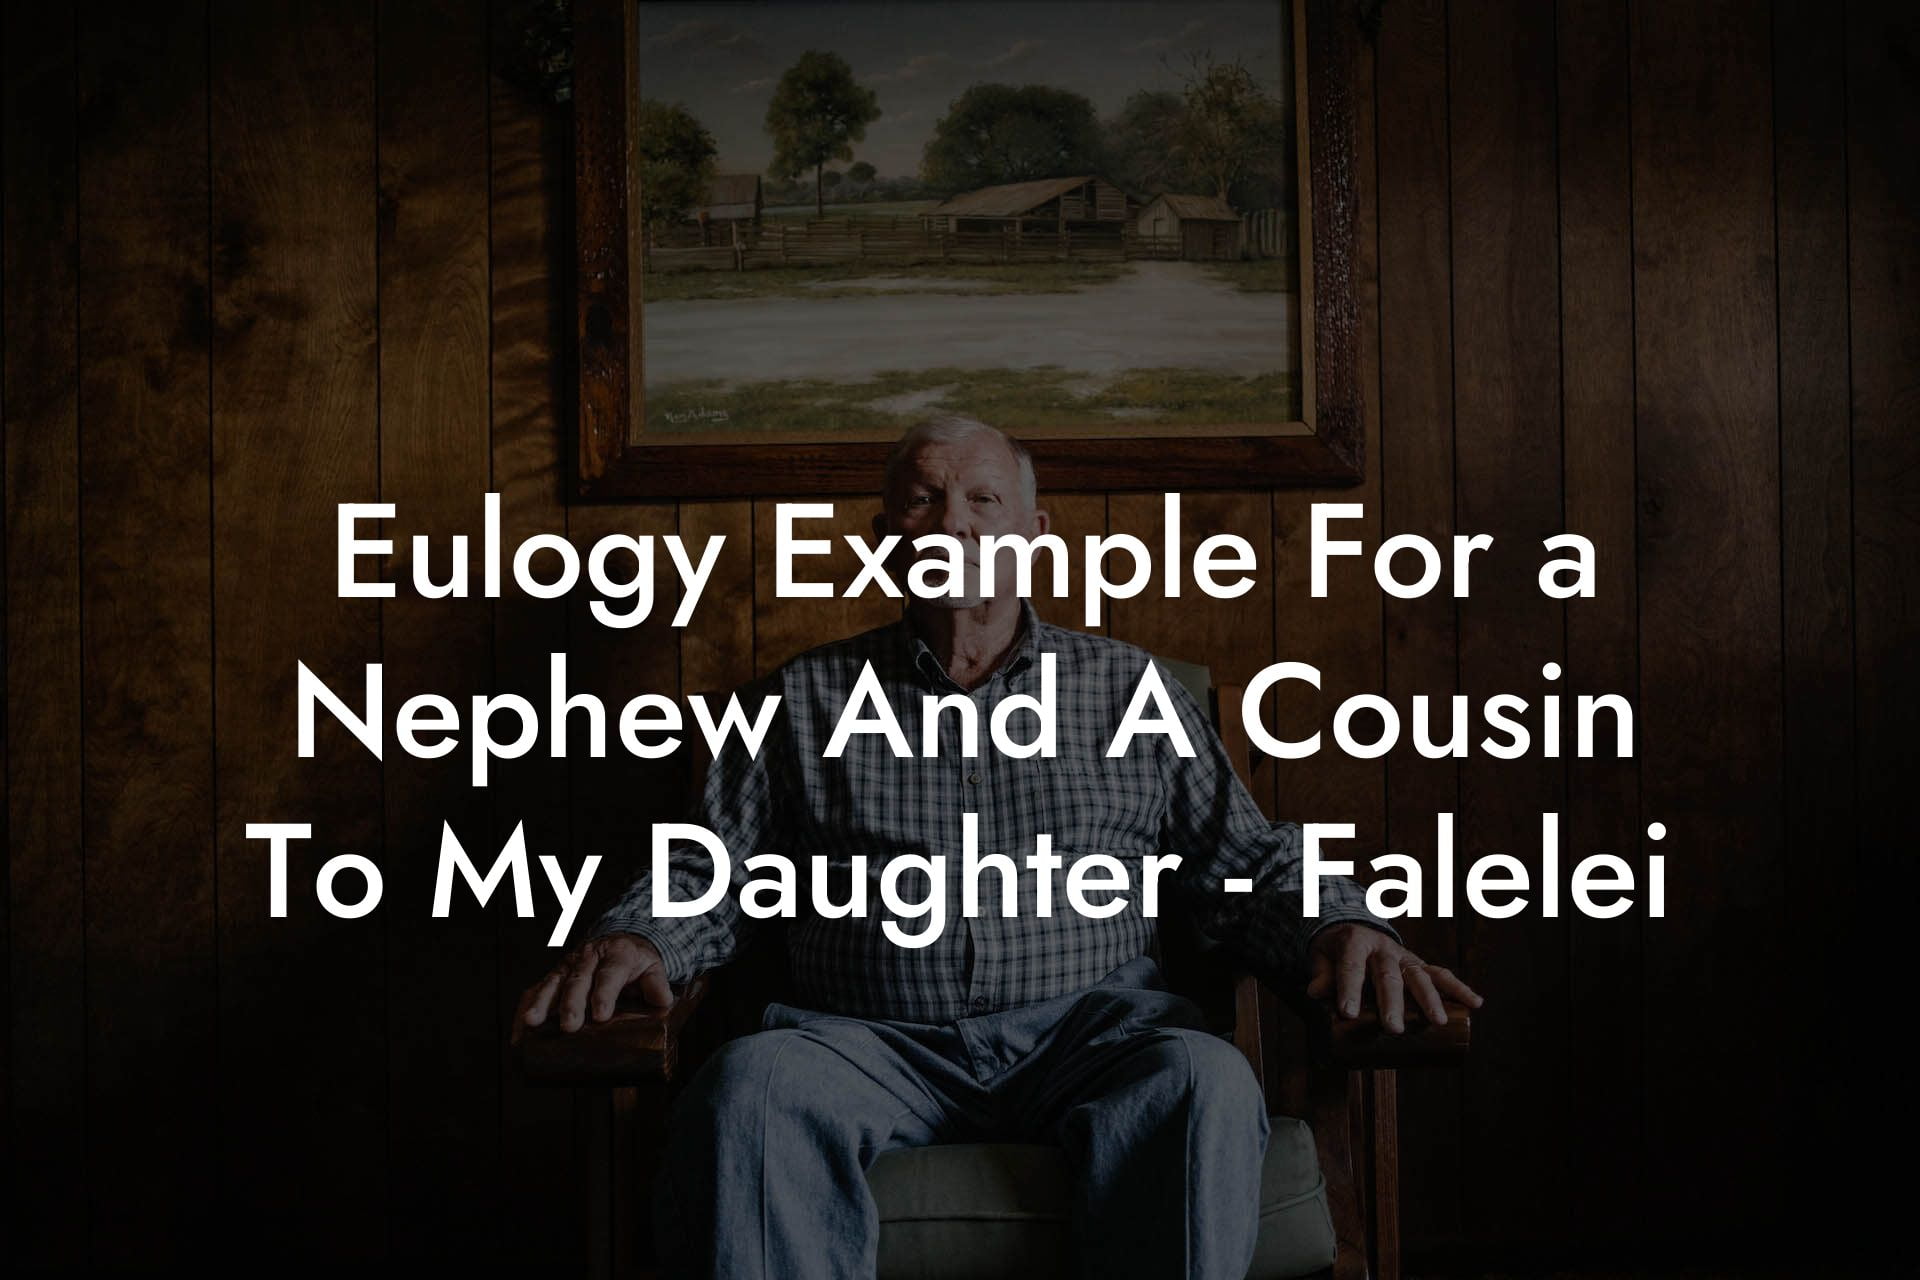 Eulogy Example For a Nephew And A Cousin To My Daughter   Falelei